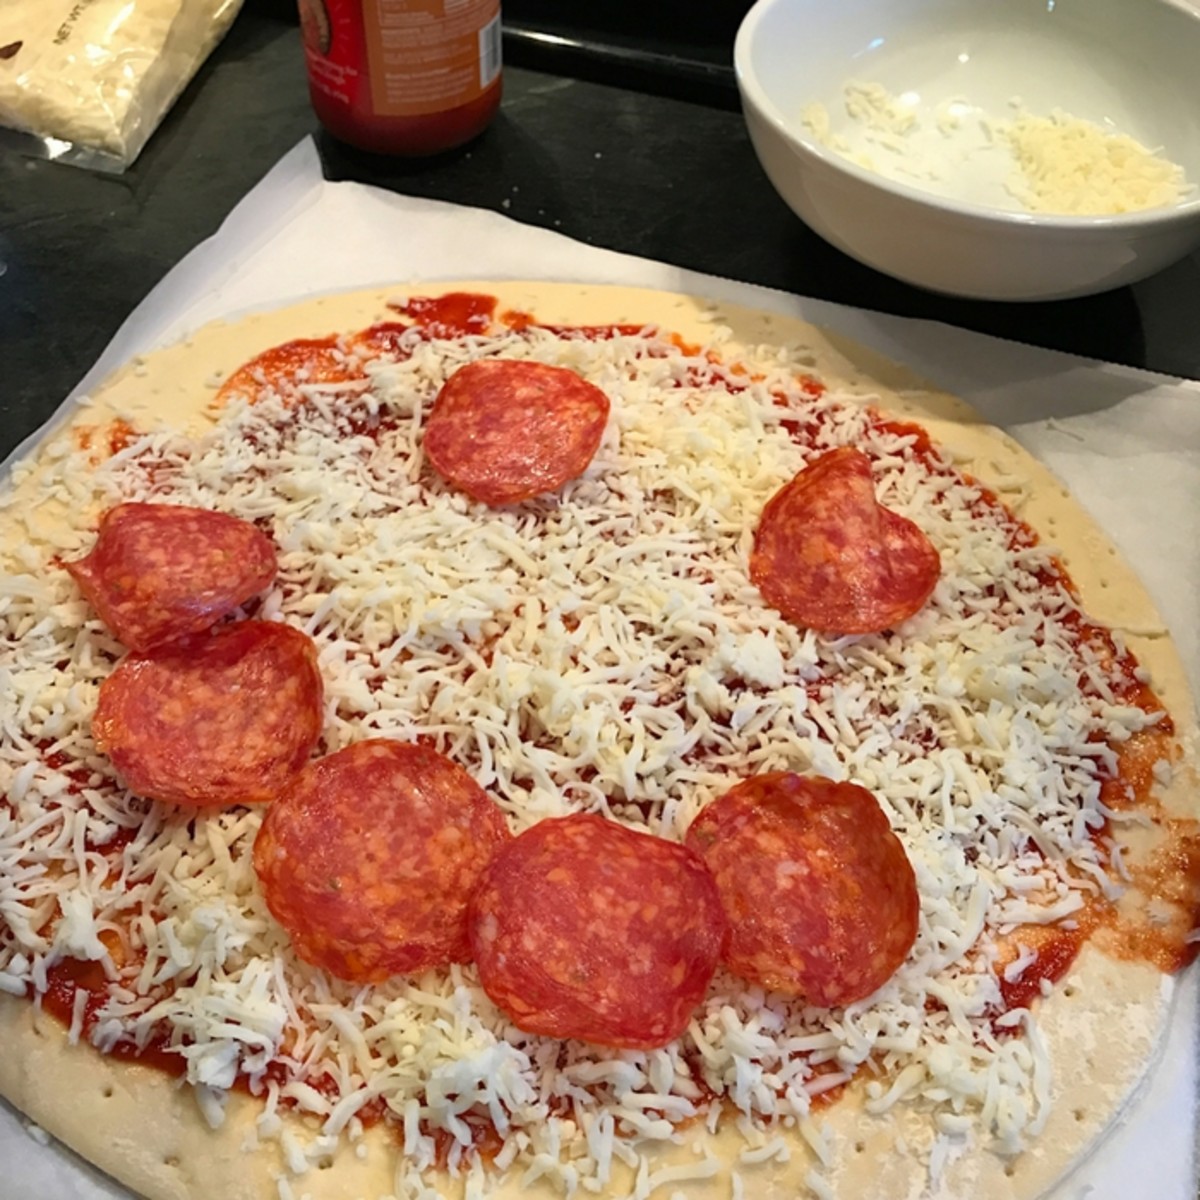 make your own pizza